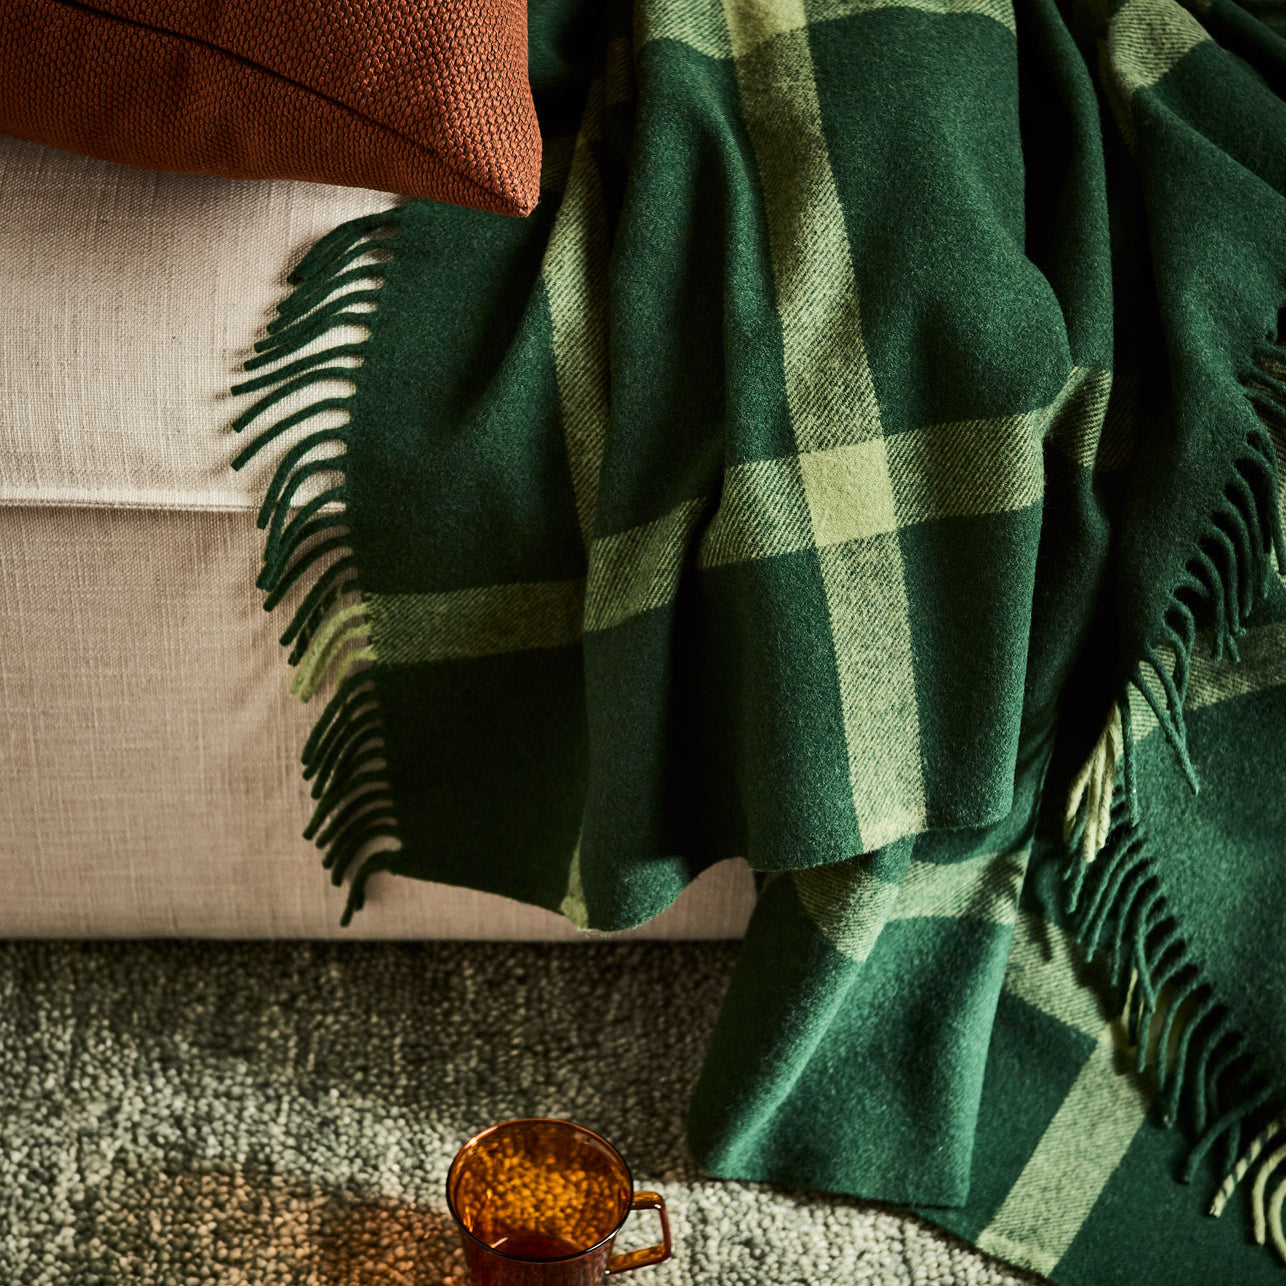 Ravine throw in forest draped over a sofa.